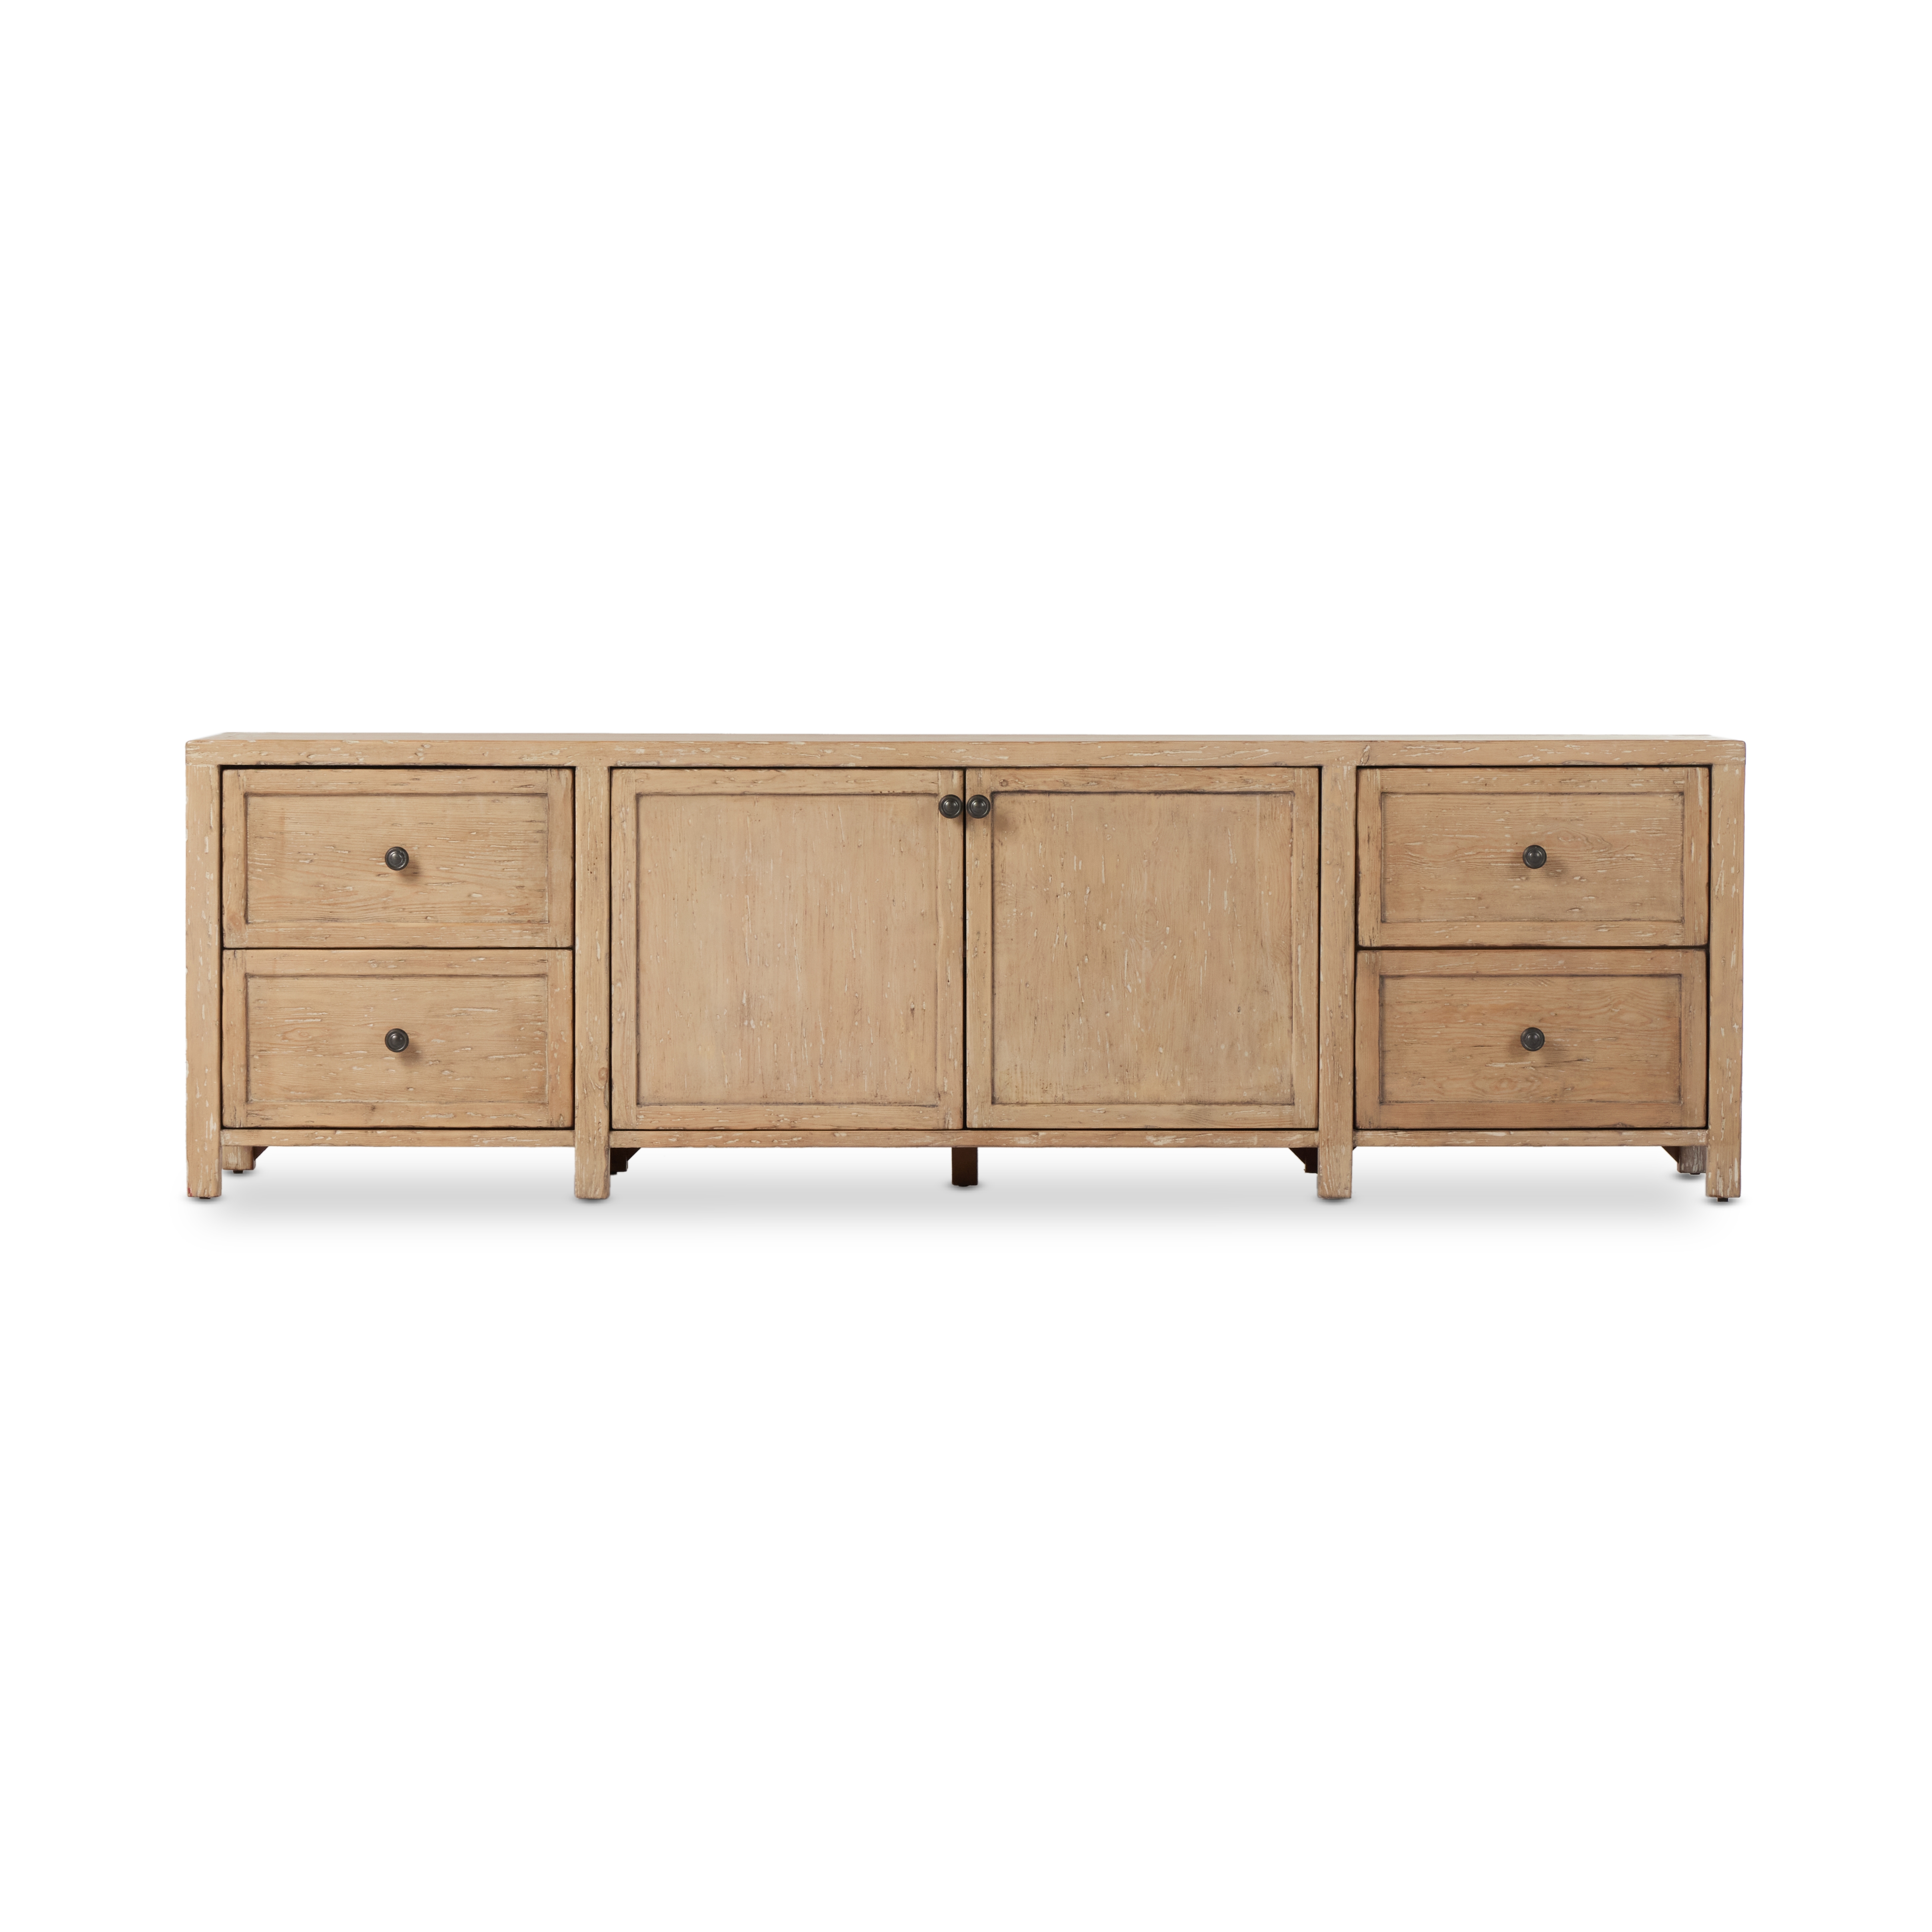 Gaines Media Console-Aged Light Pine - Image 4